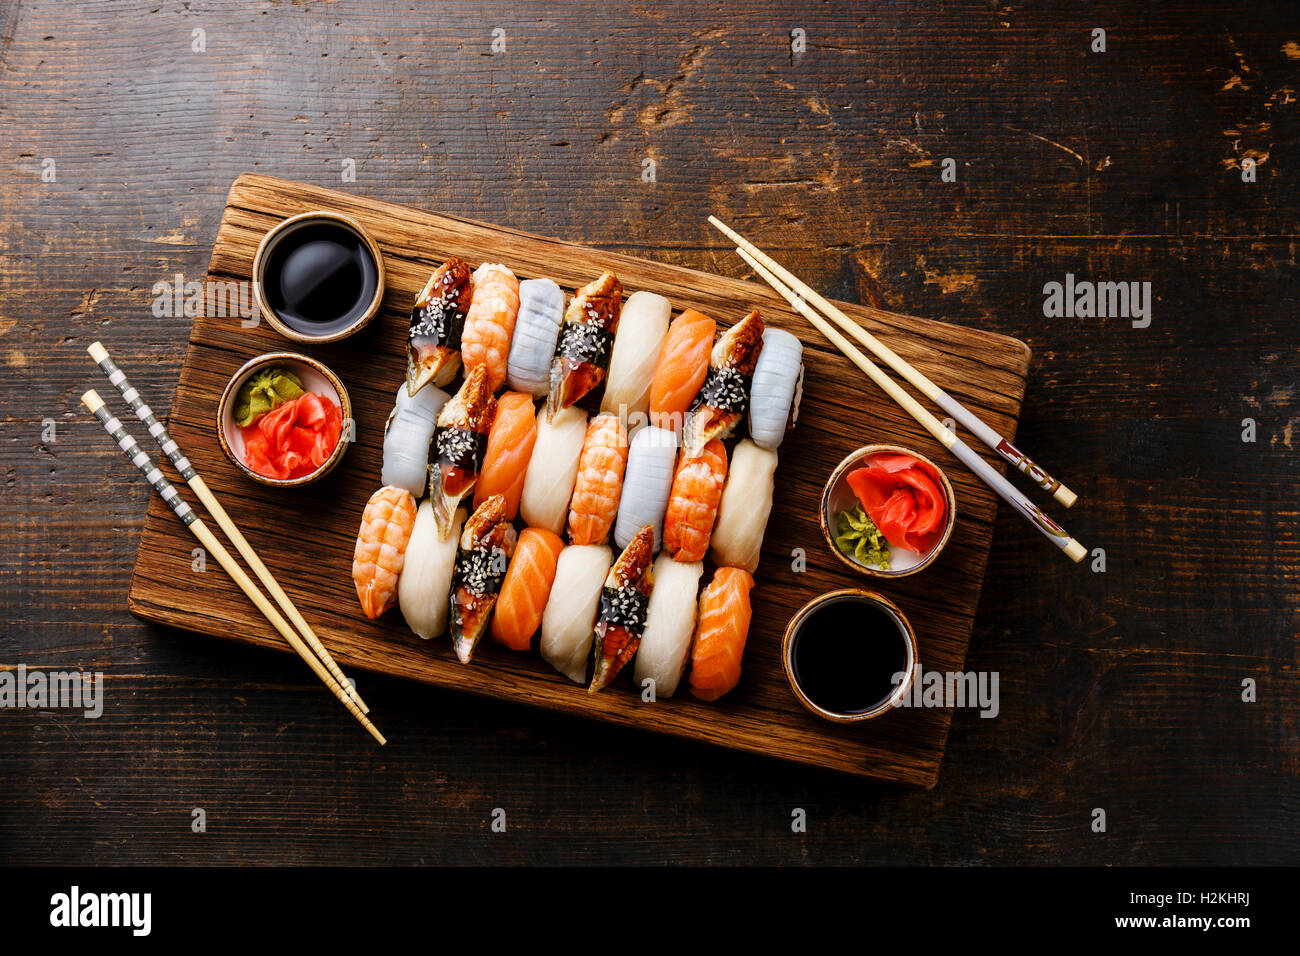 Nigiri sushi set for two on wooden serving board block copy space Stock Photo